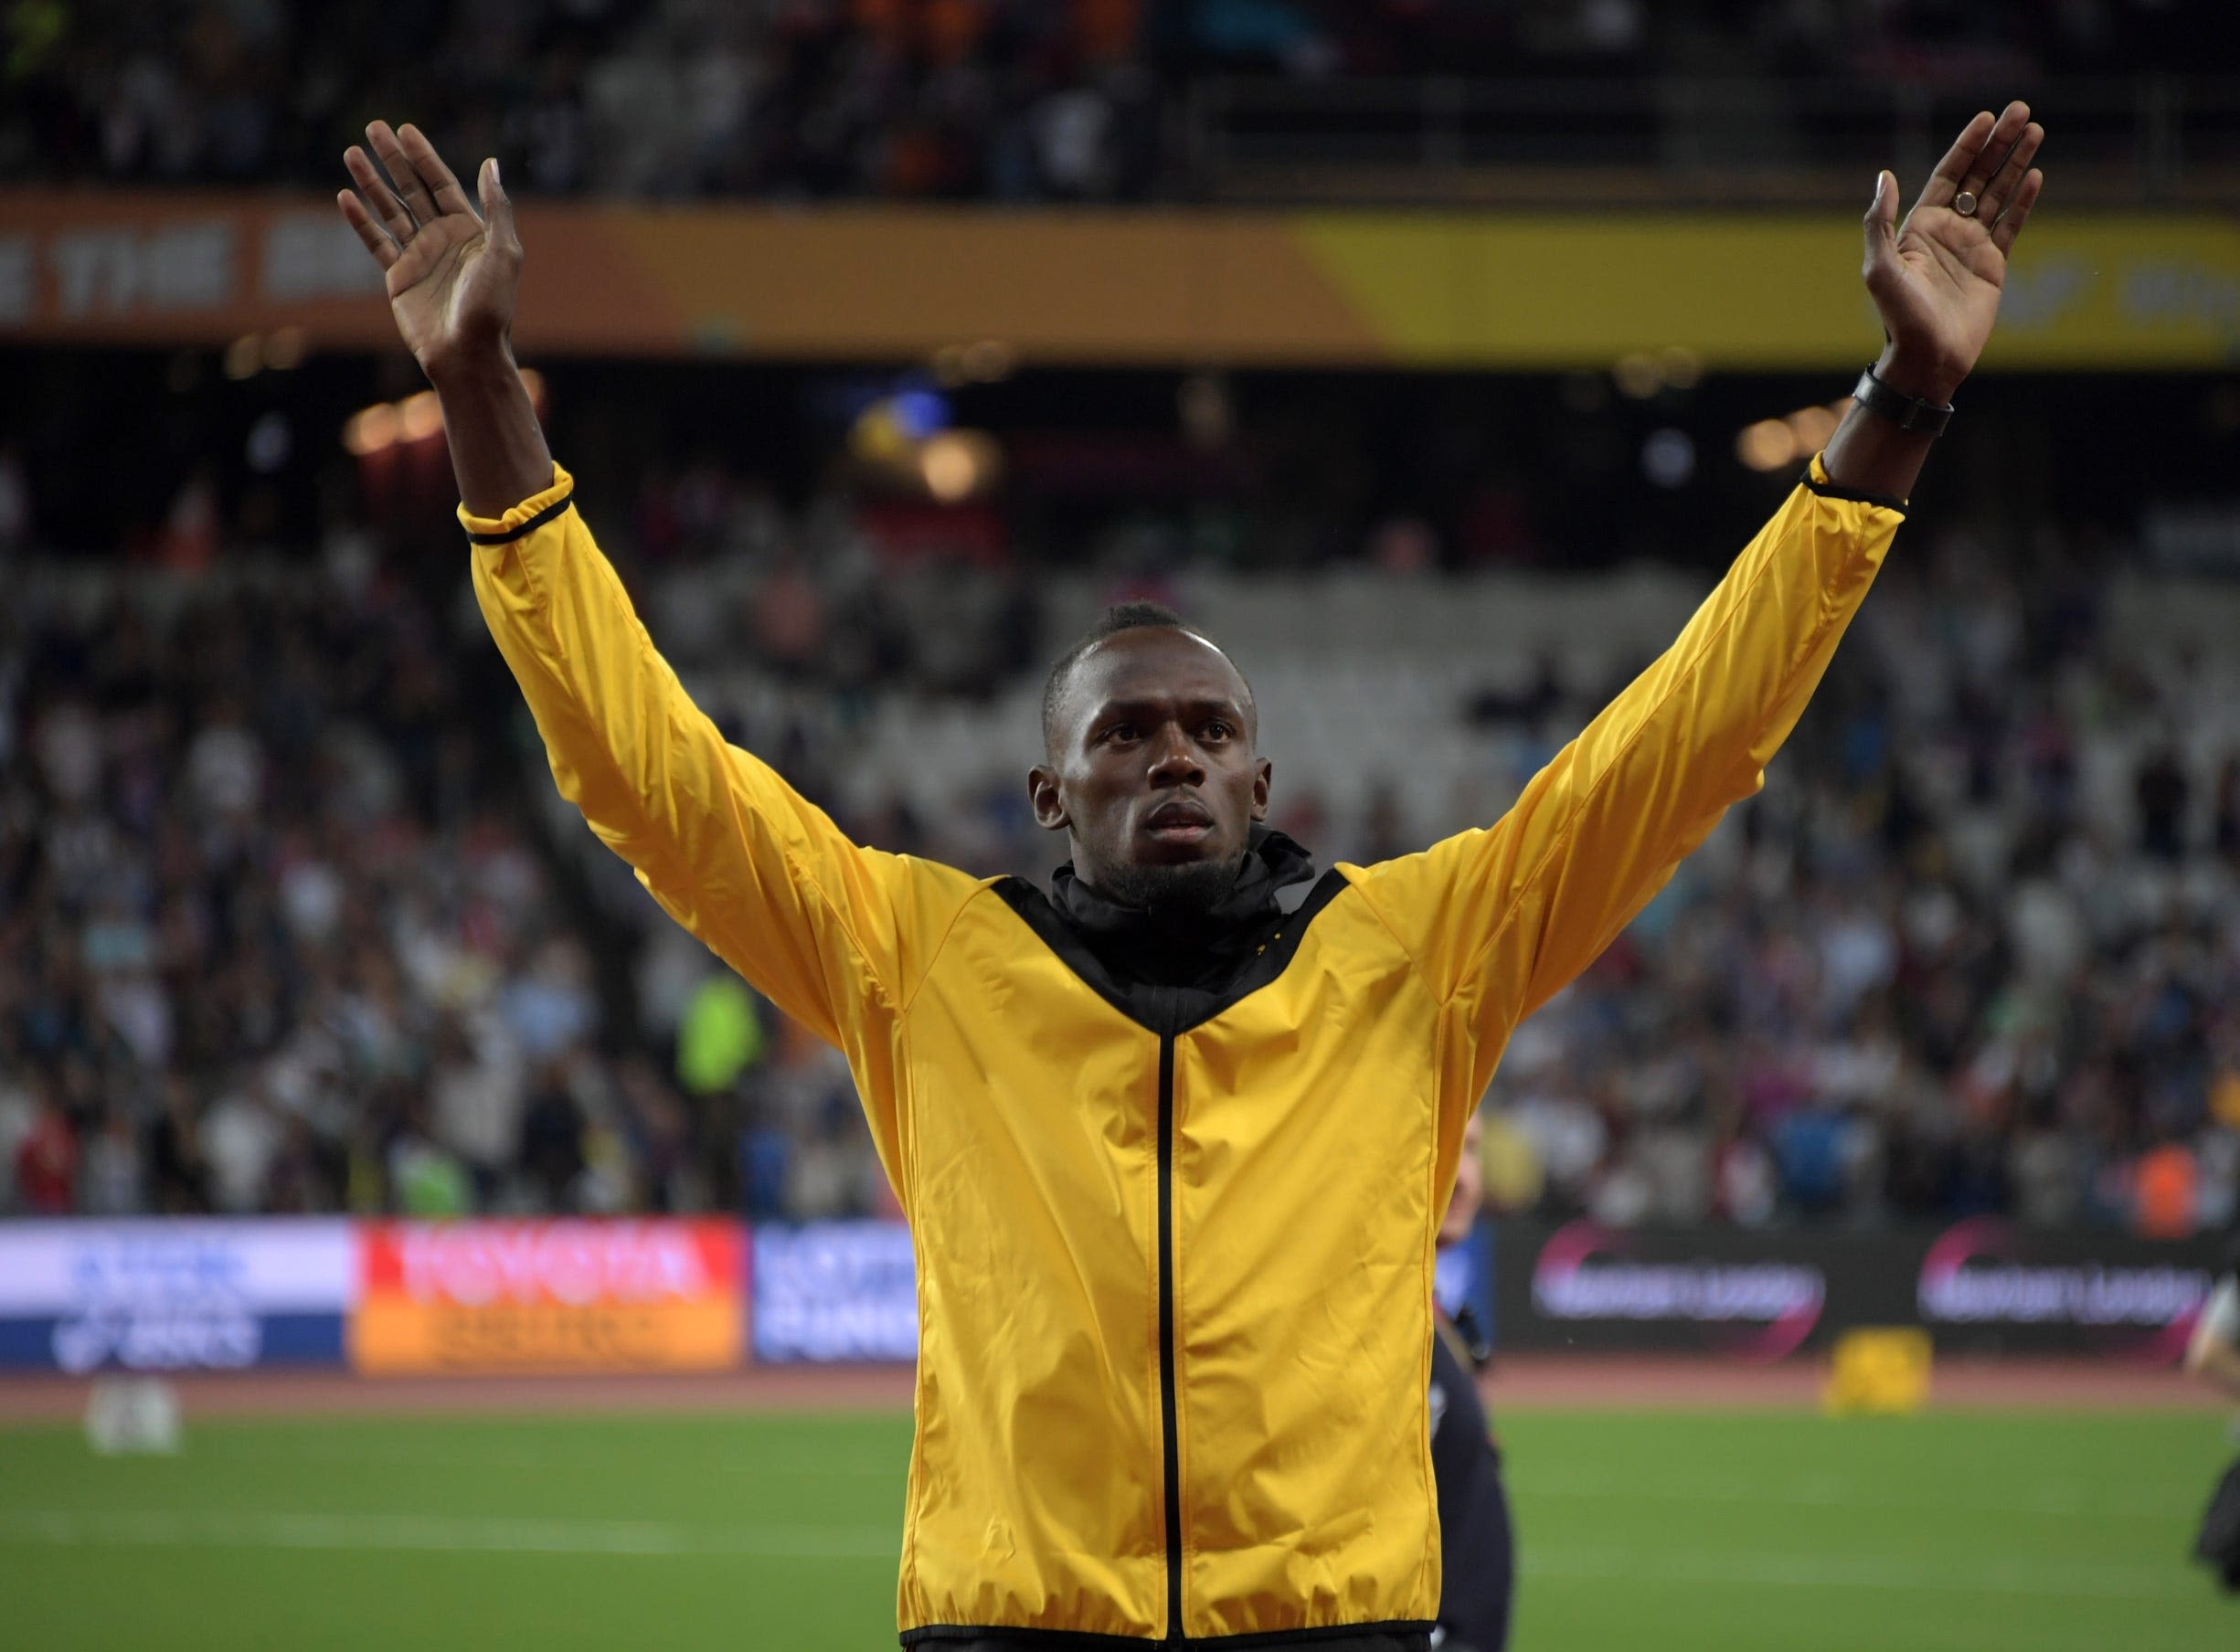 How fast was Usain Bolt? Olympic legend's records